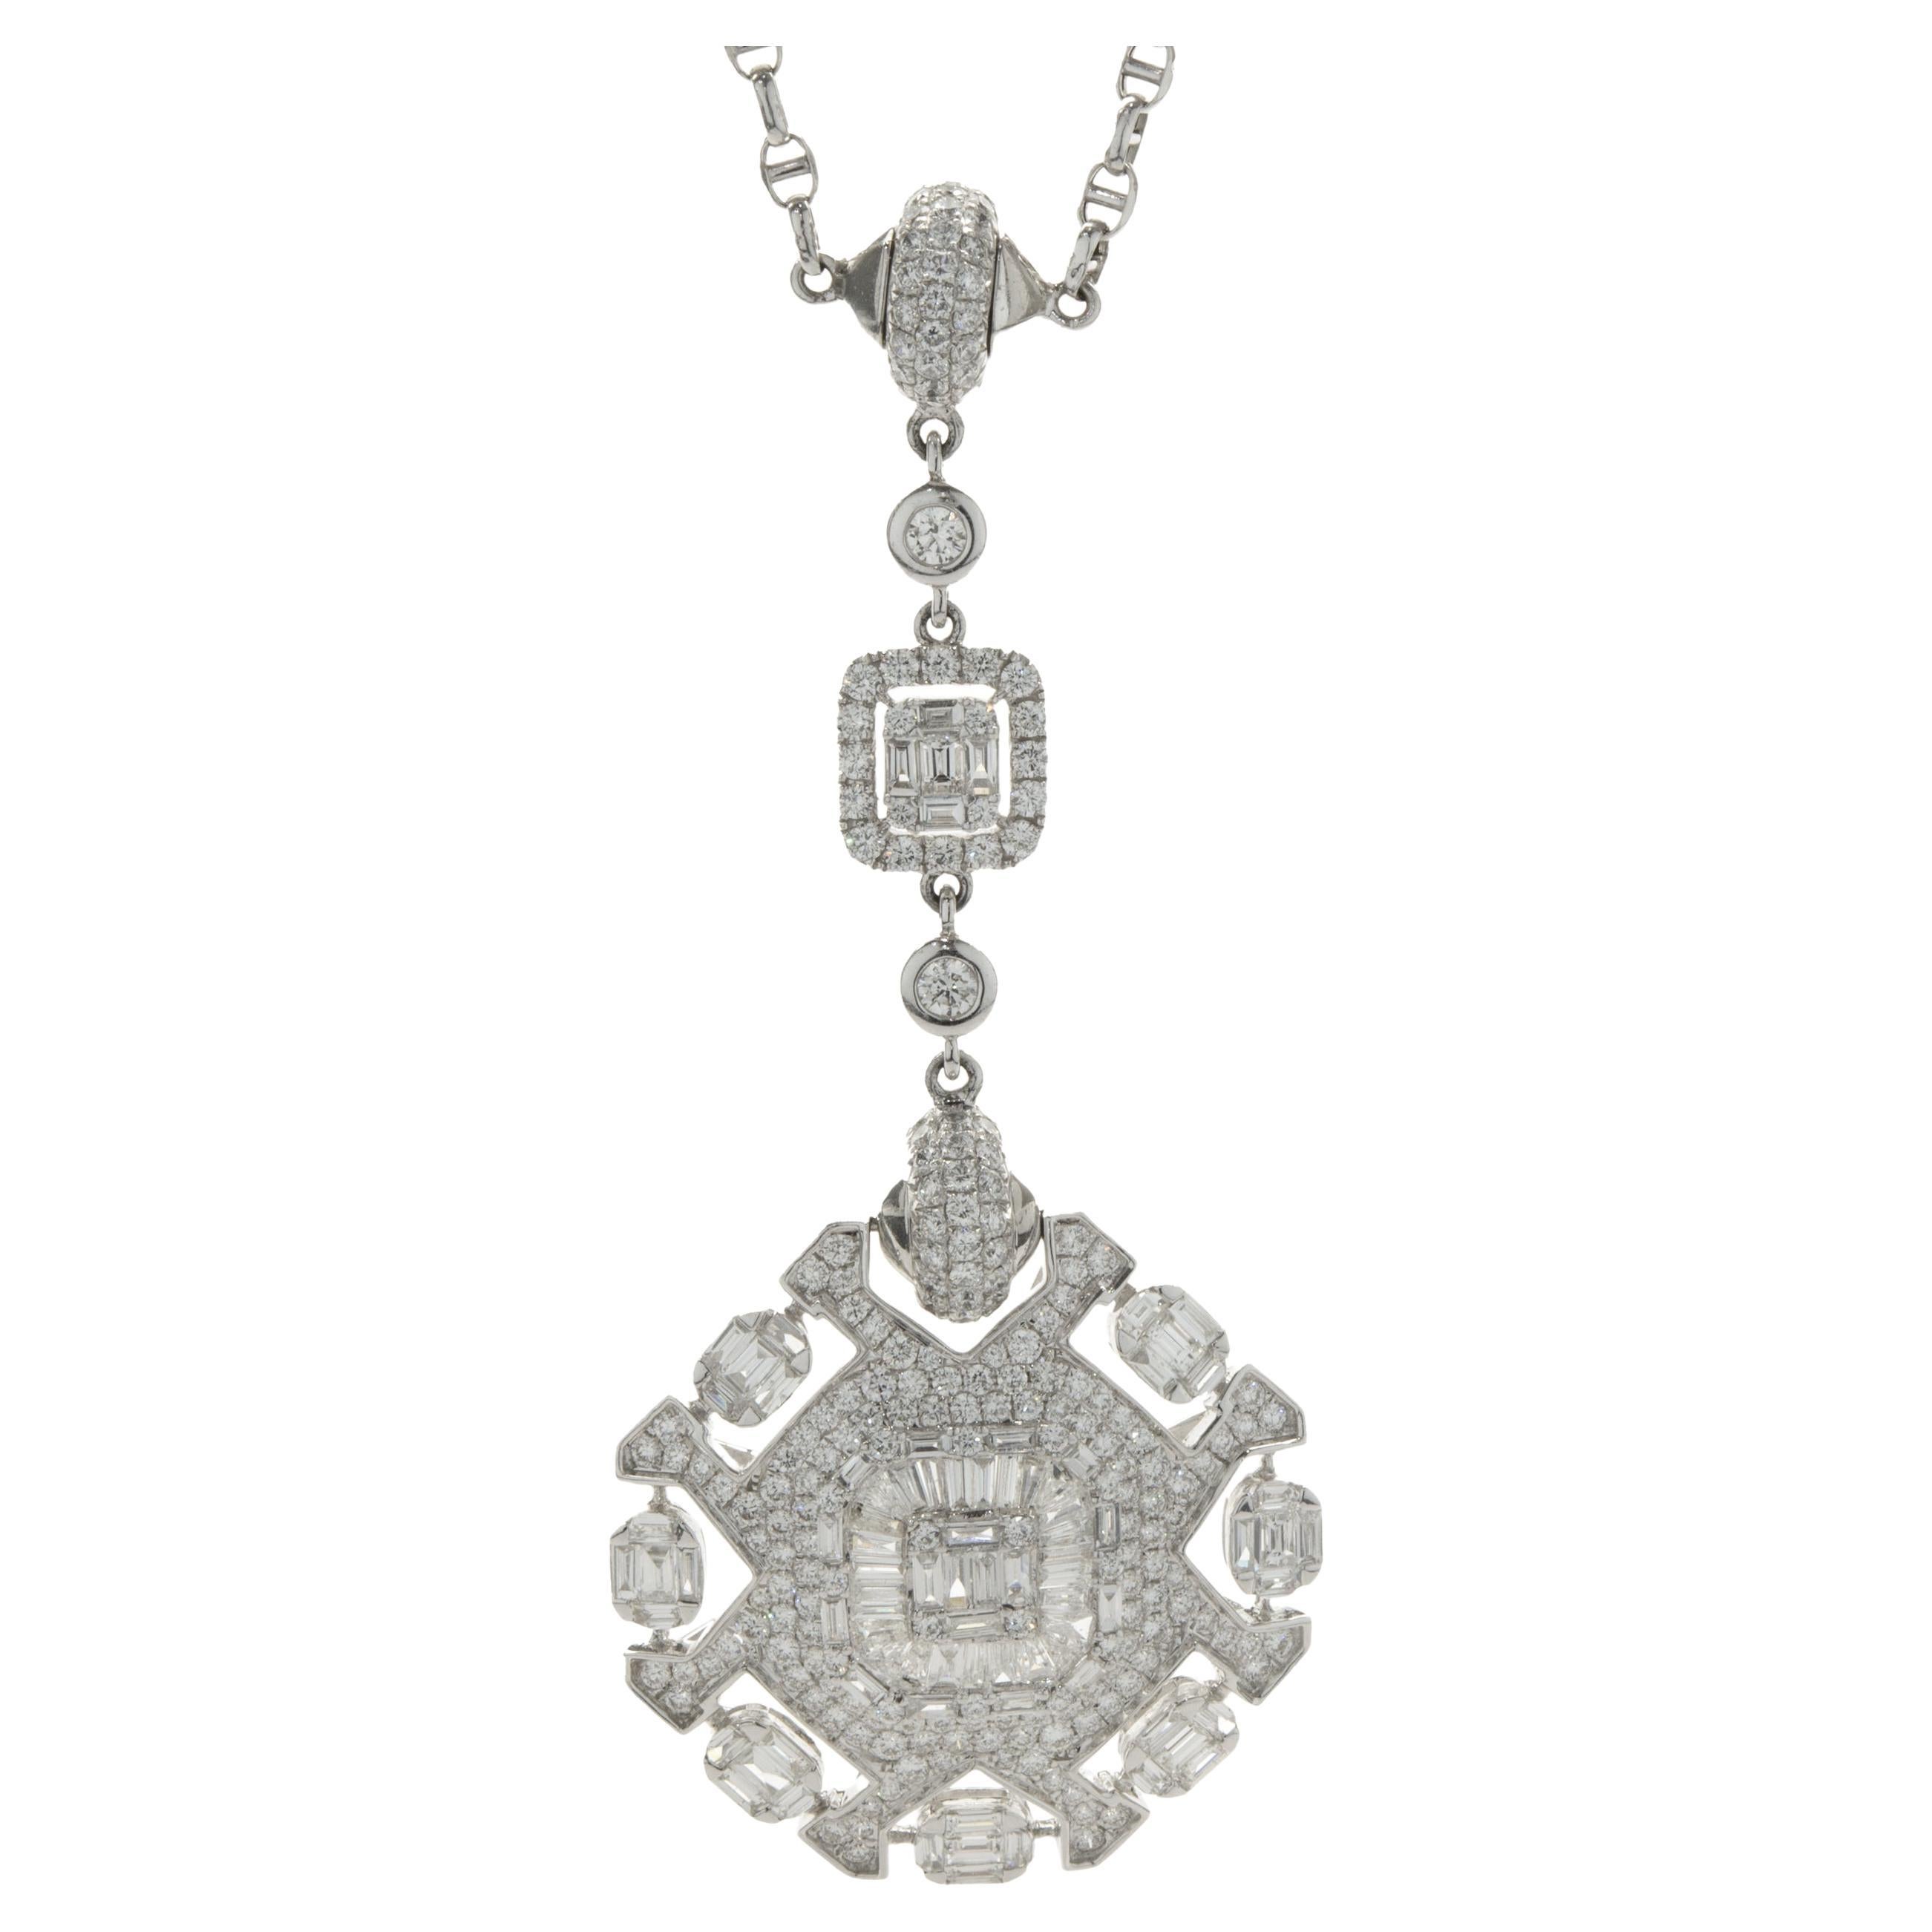 18KW Pave Diamond Ornate Necklace with Mosaic Center and Pave Diamond Stations